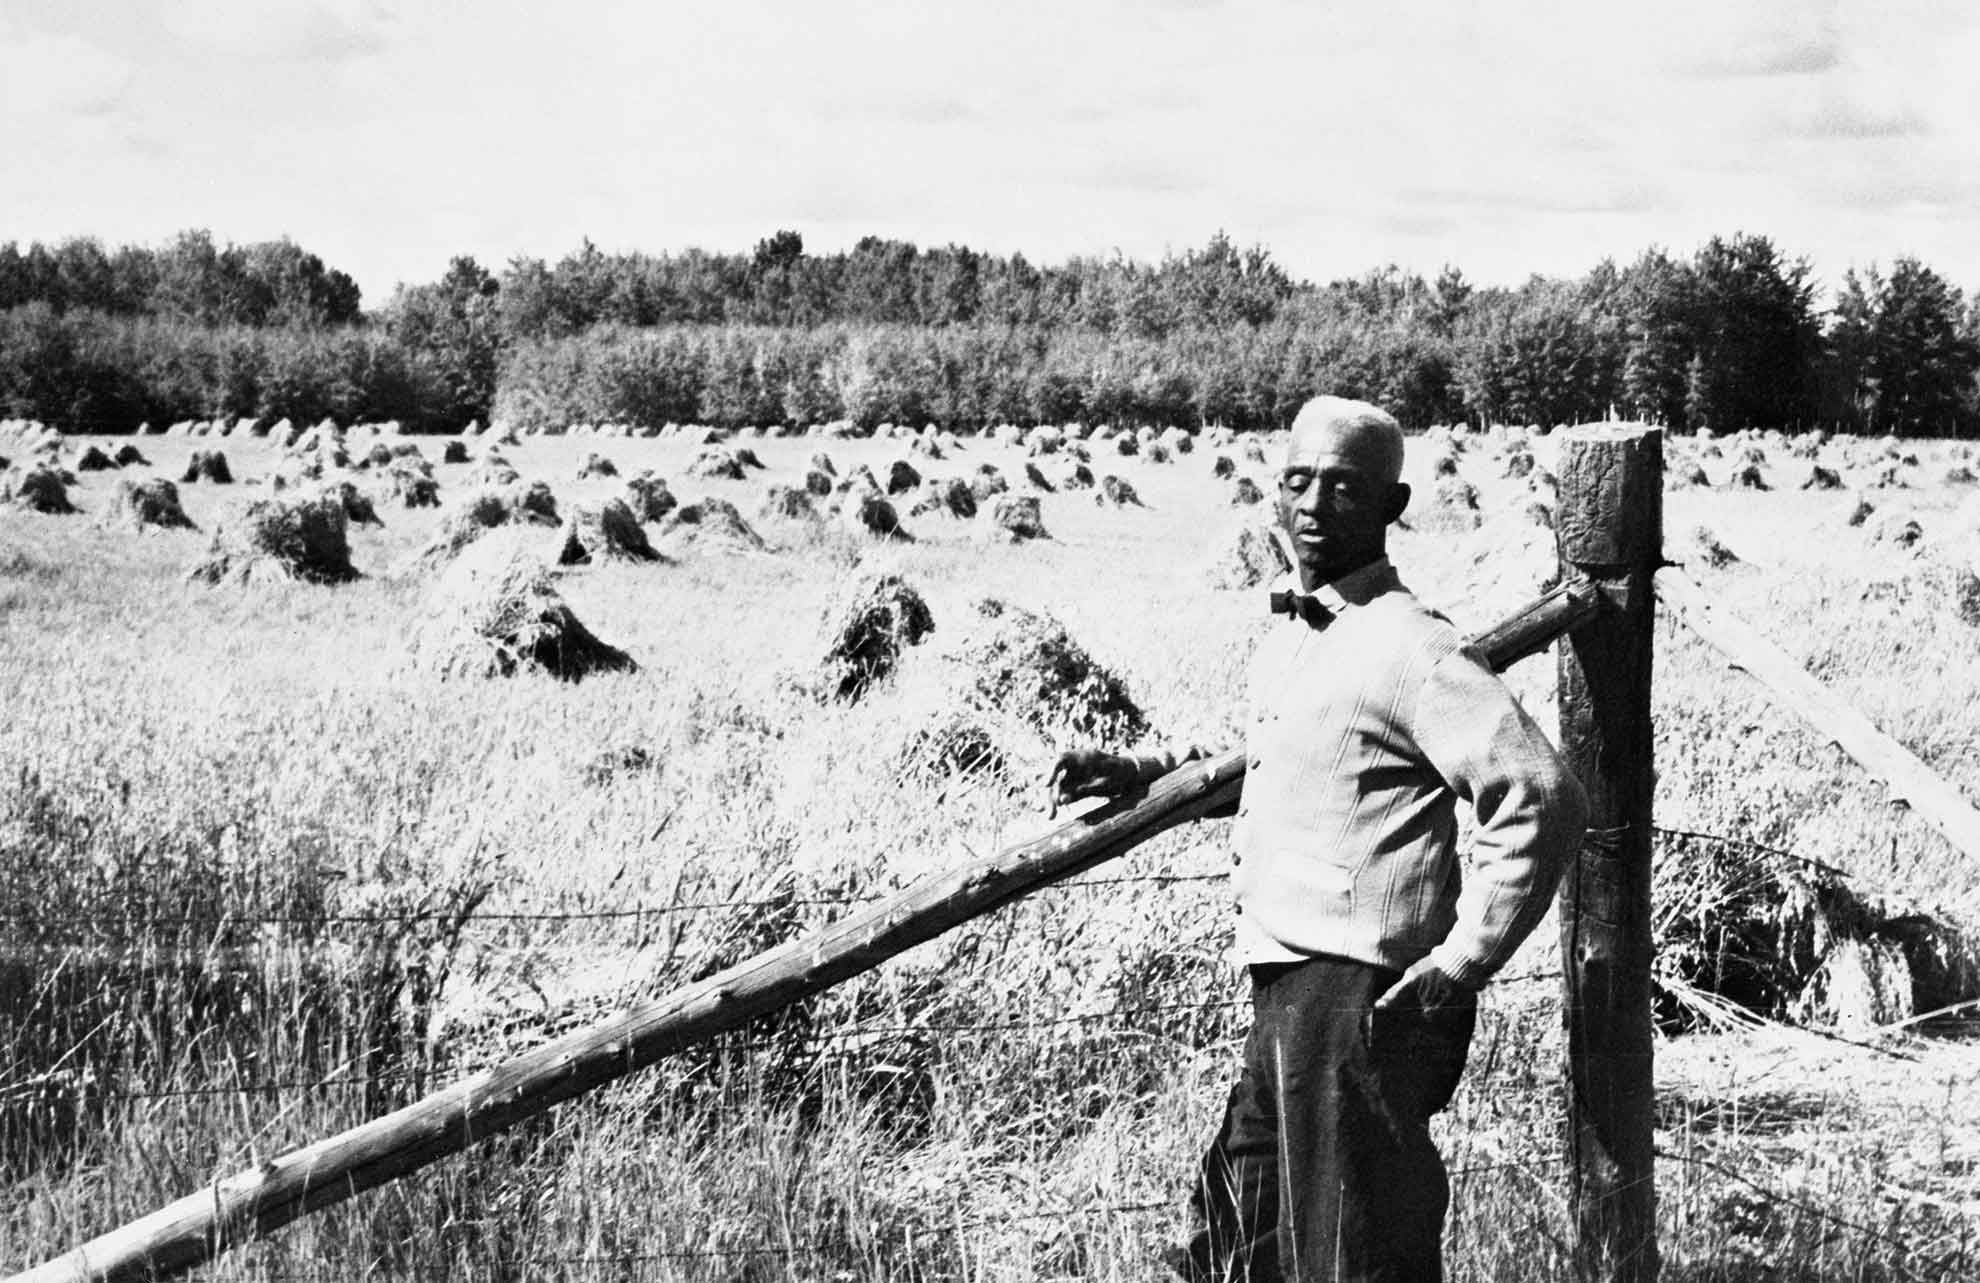 A man stands against a fence in front of a field.